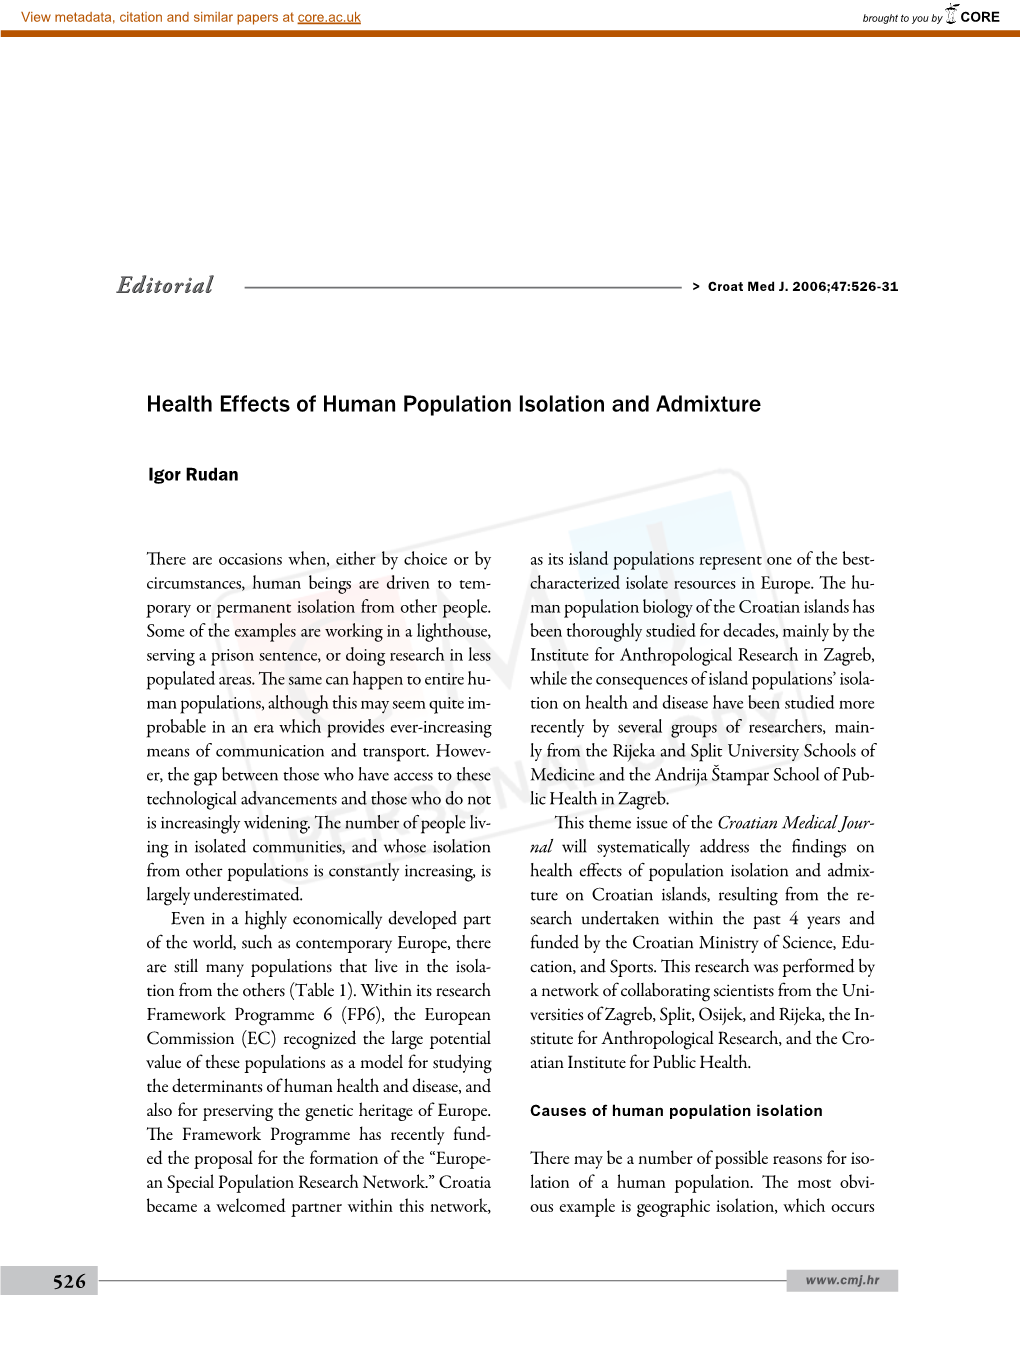 Health Effects of Human Population Isolation and Admixture Editorial